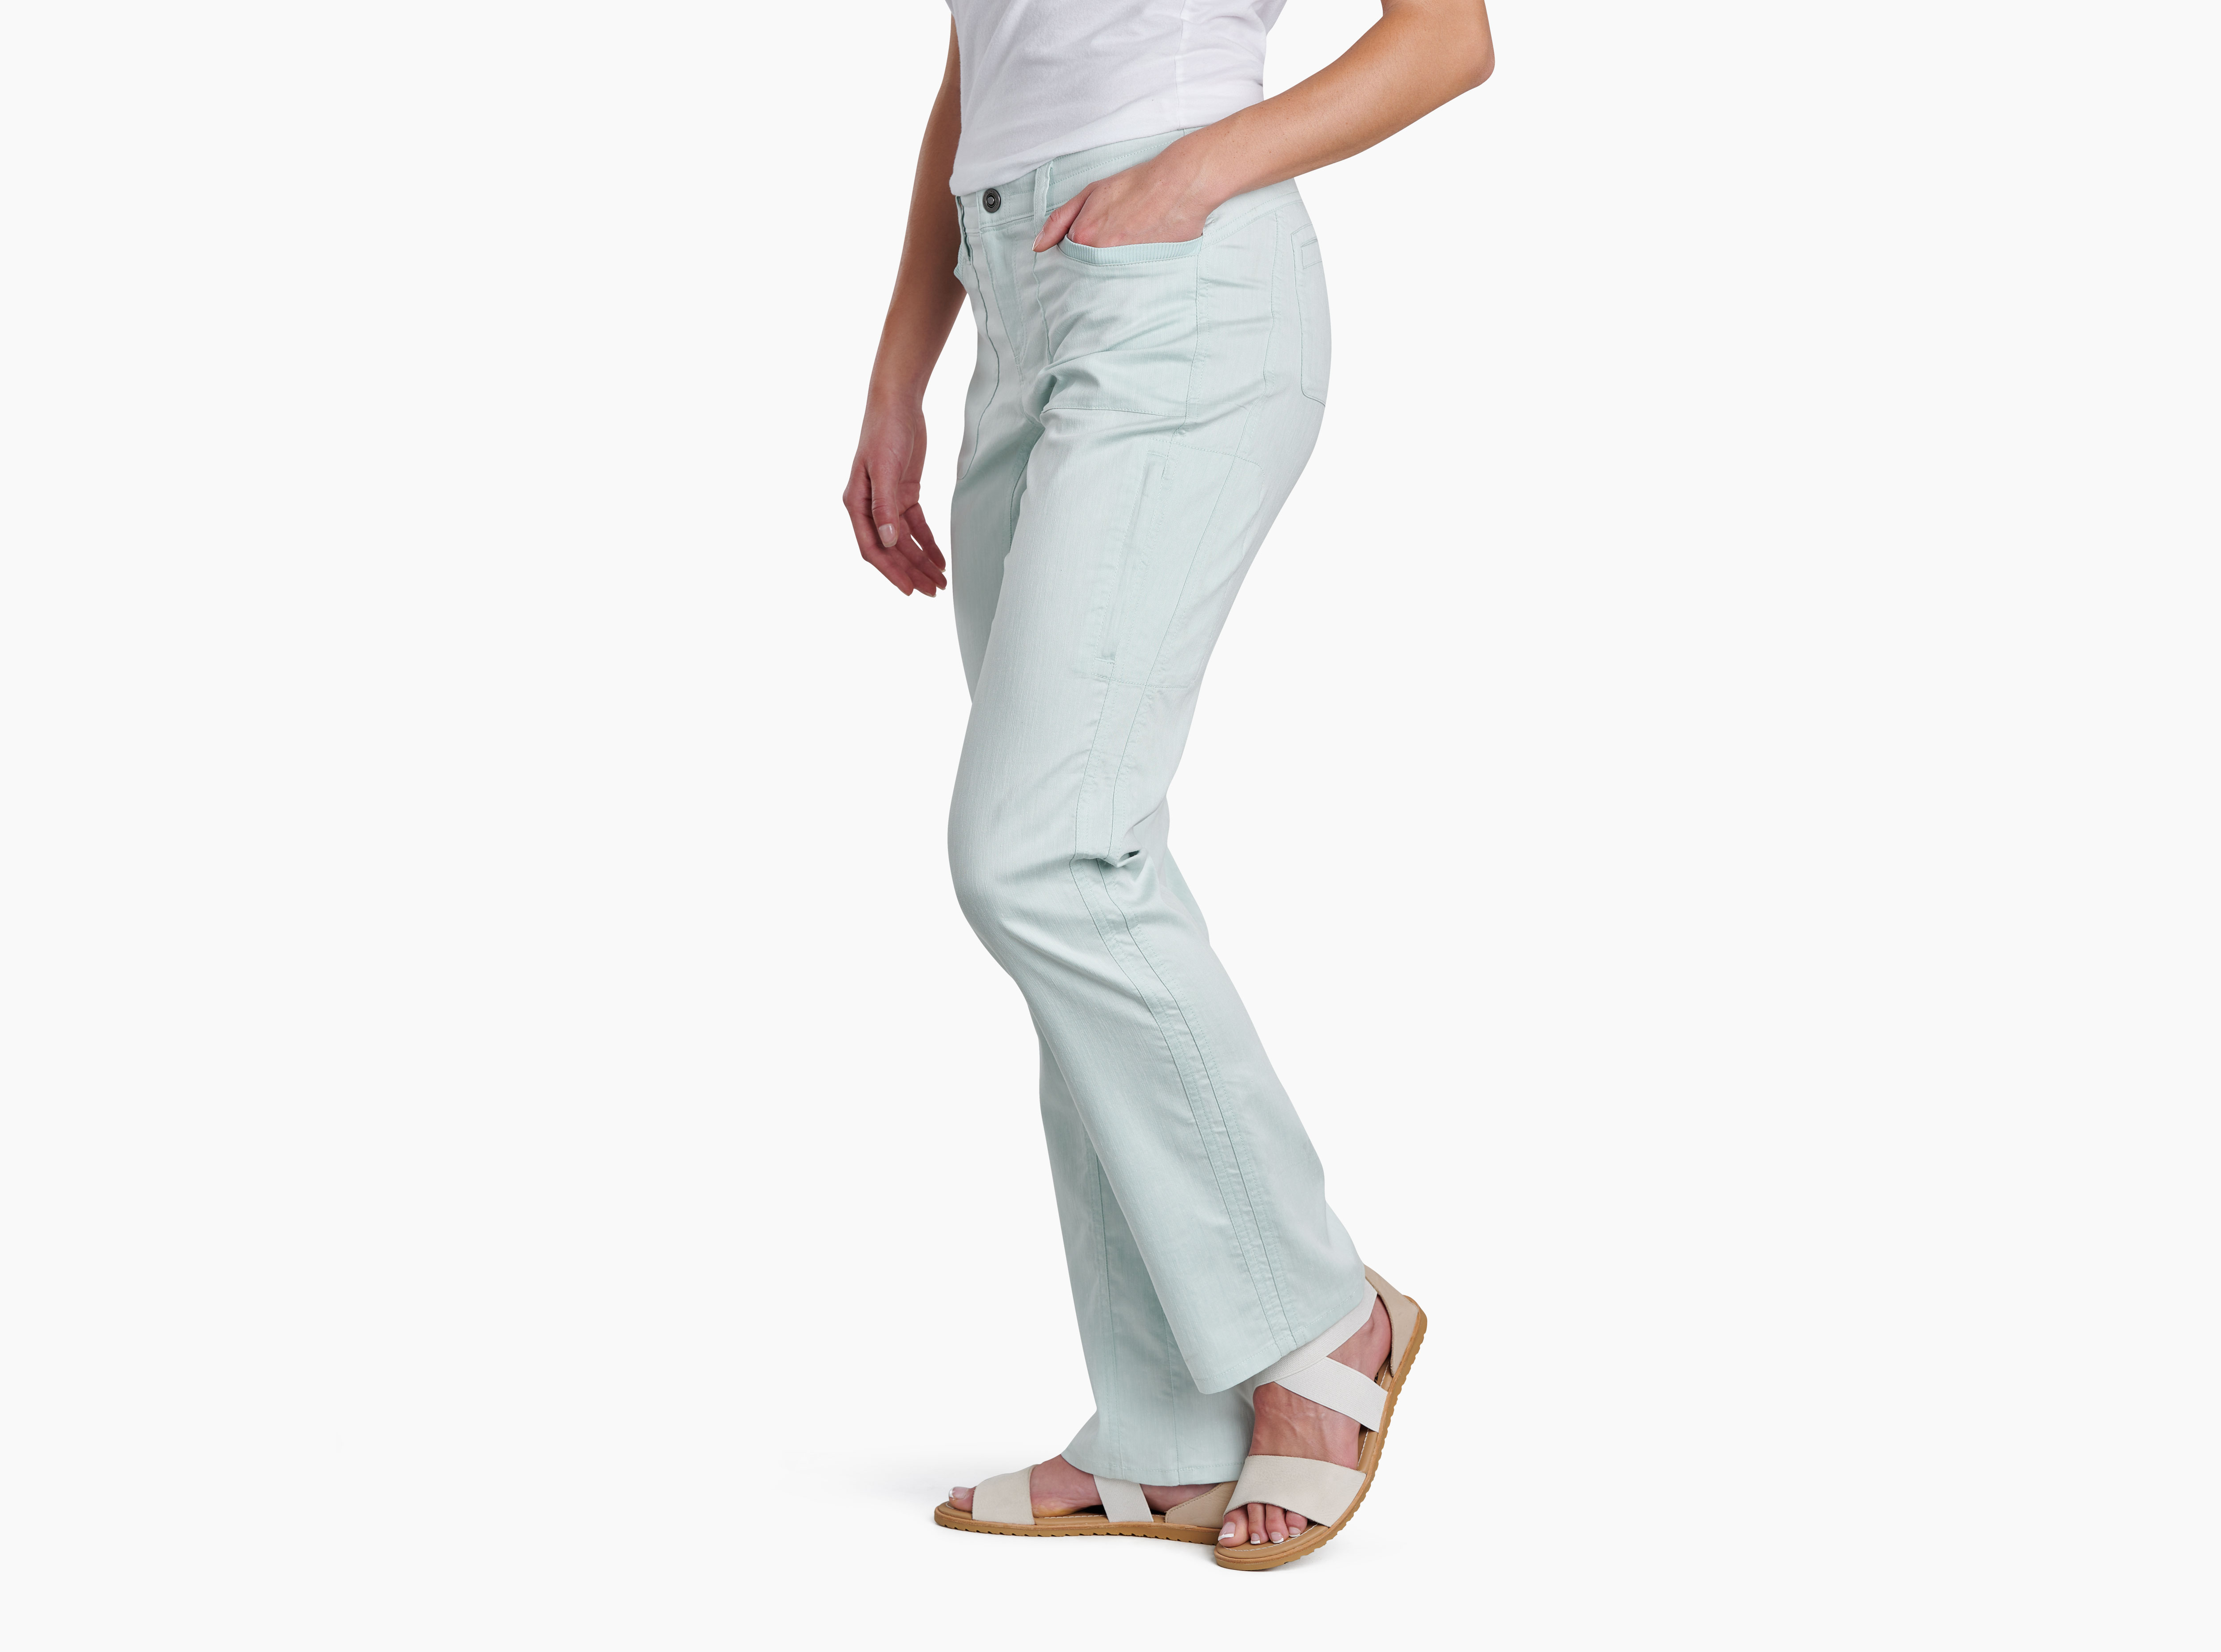 Cabo™ Pant in Women's Pants, KÜHL Clothing